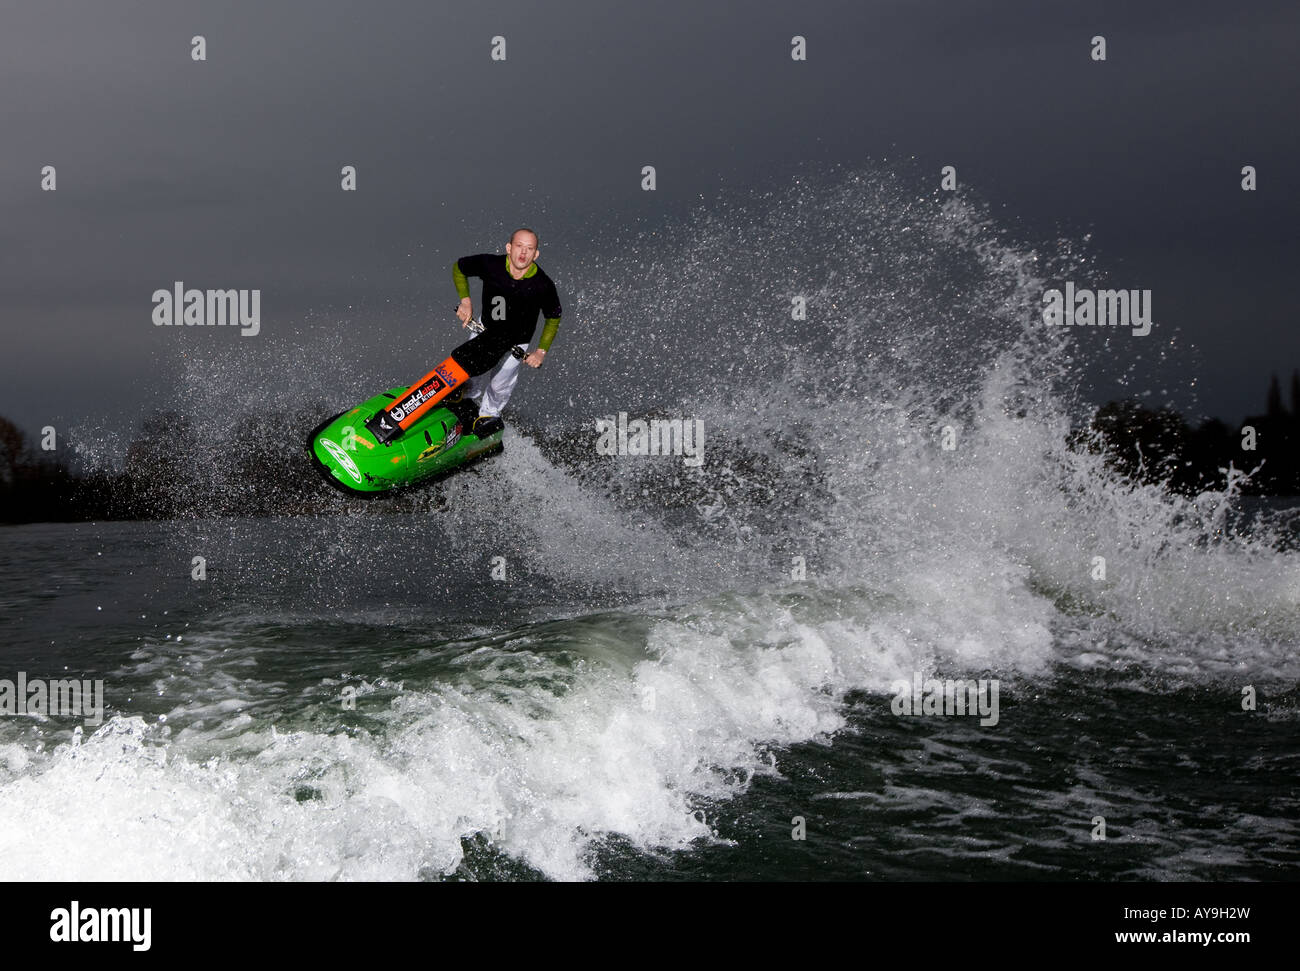 Jet skier mid air action stunt with water spray Stock Photo